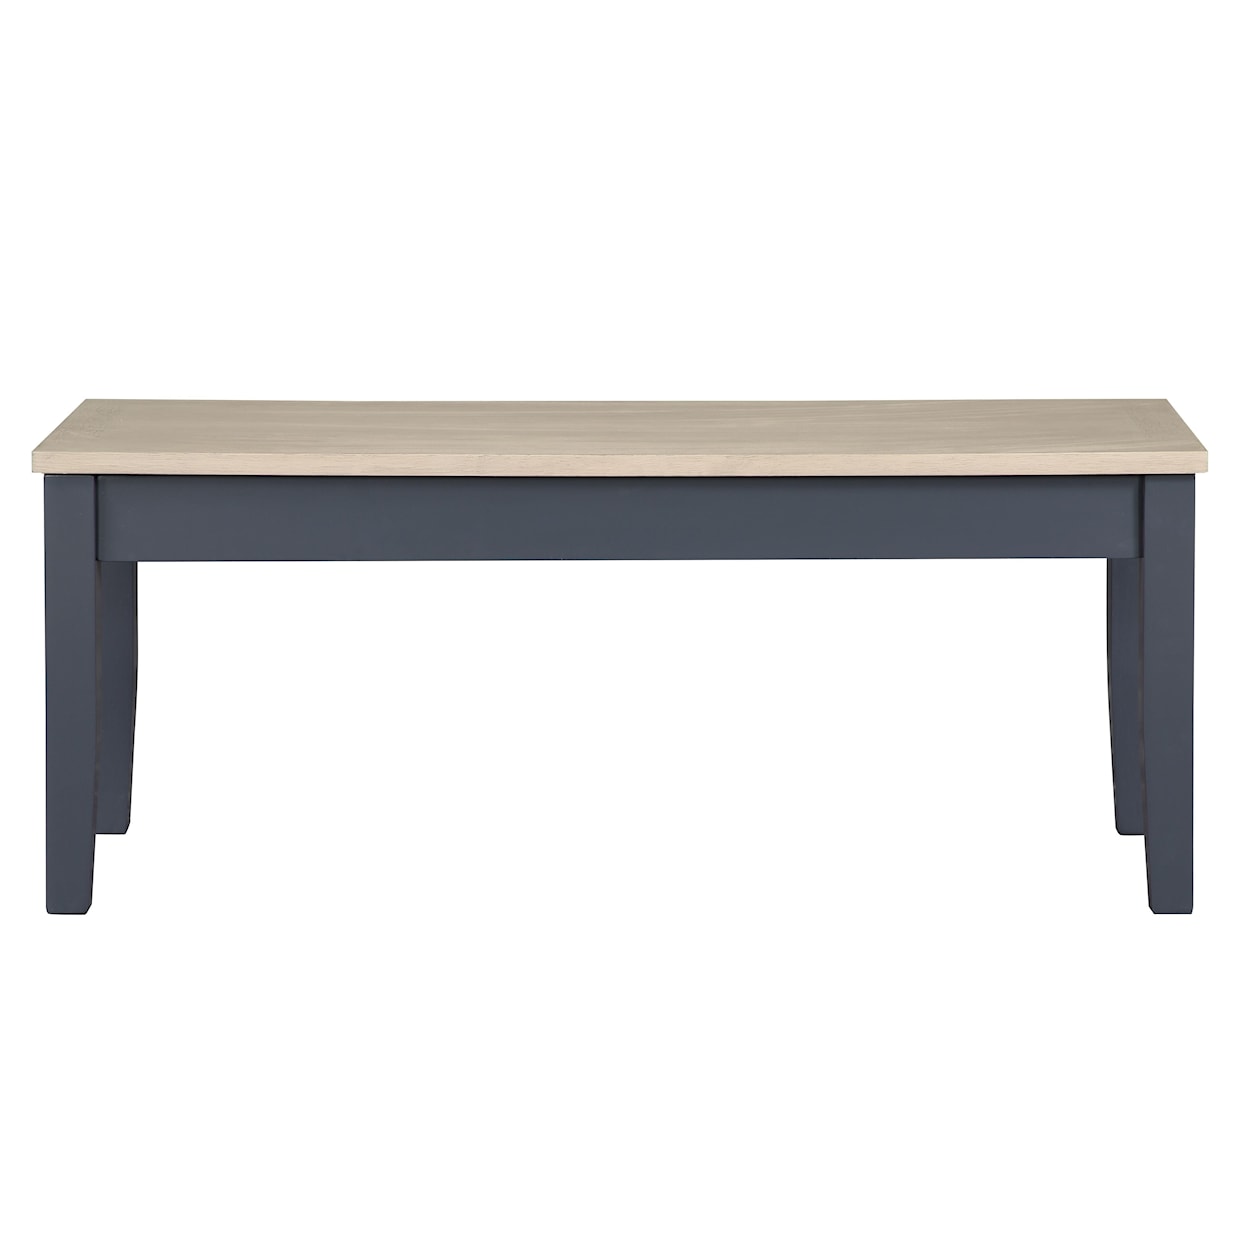 Holland House 8210 Dining Storage Bench